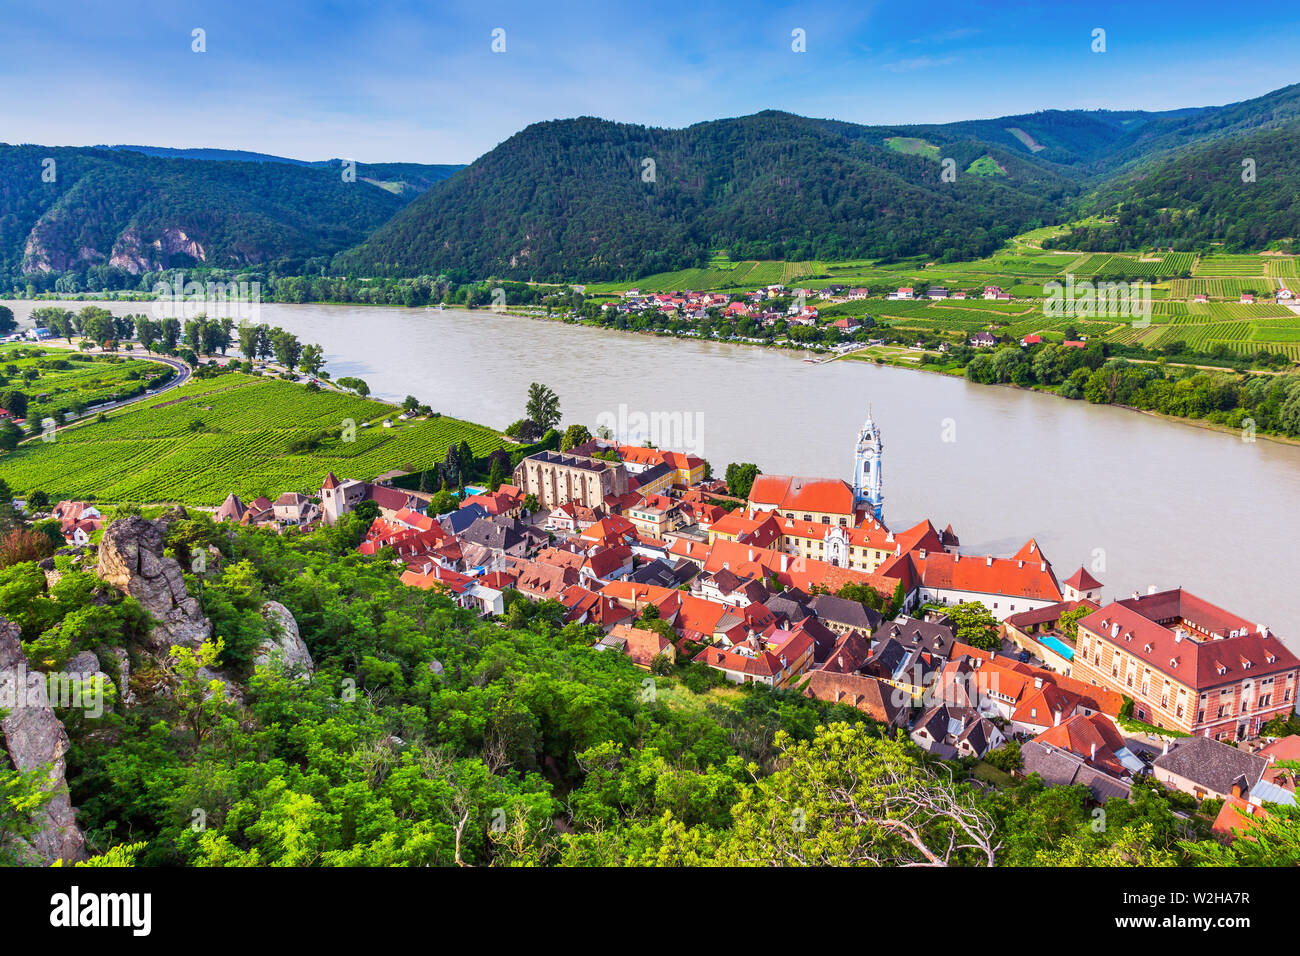 Wachau Valley, Austria. The medieval town of Durnstein along the Danube River. Stock Photo